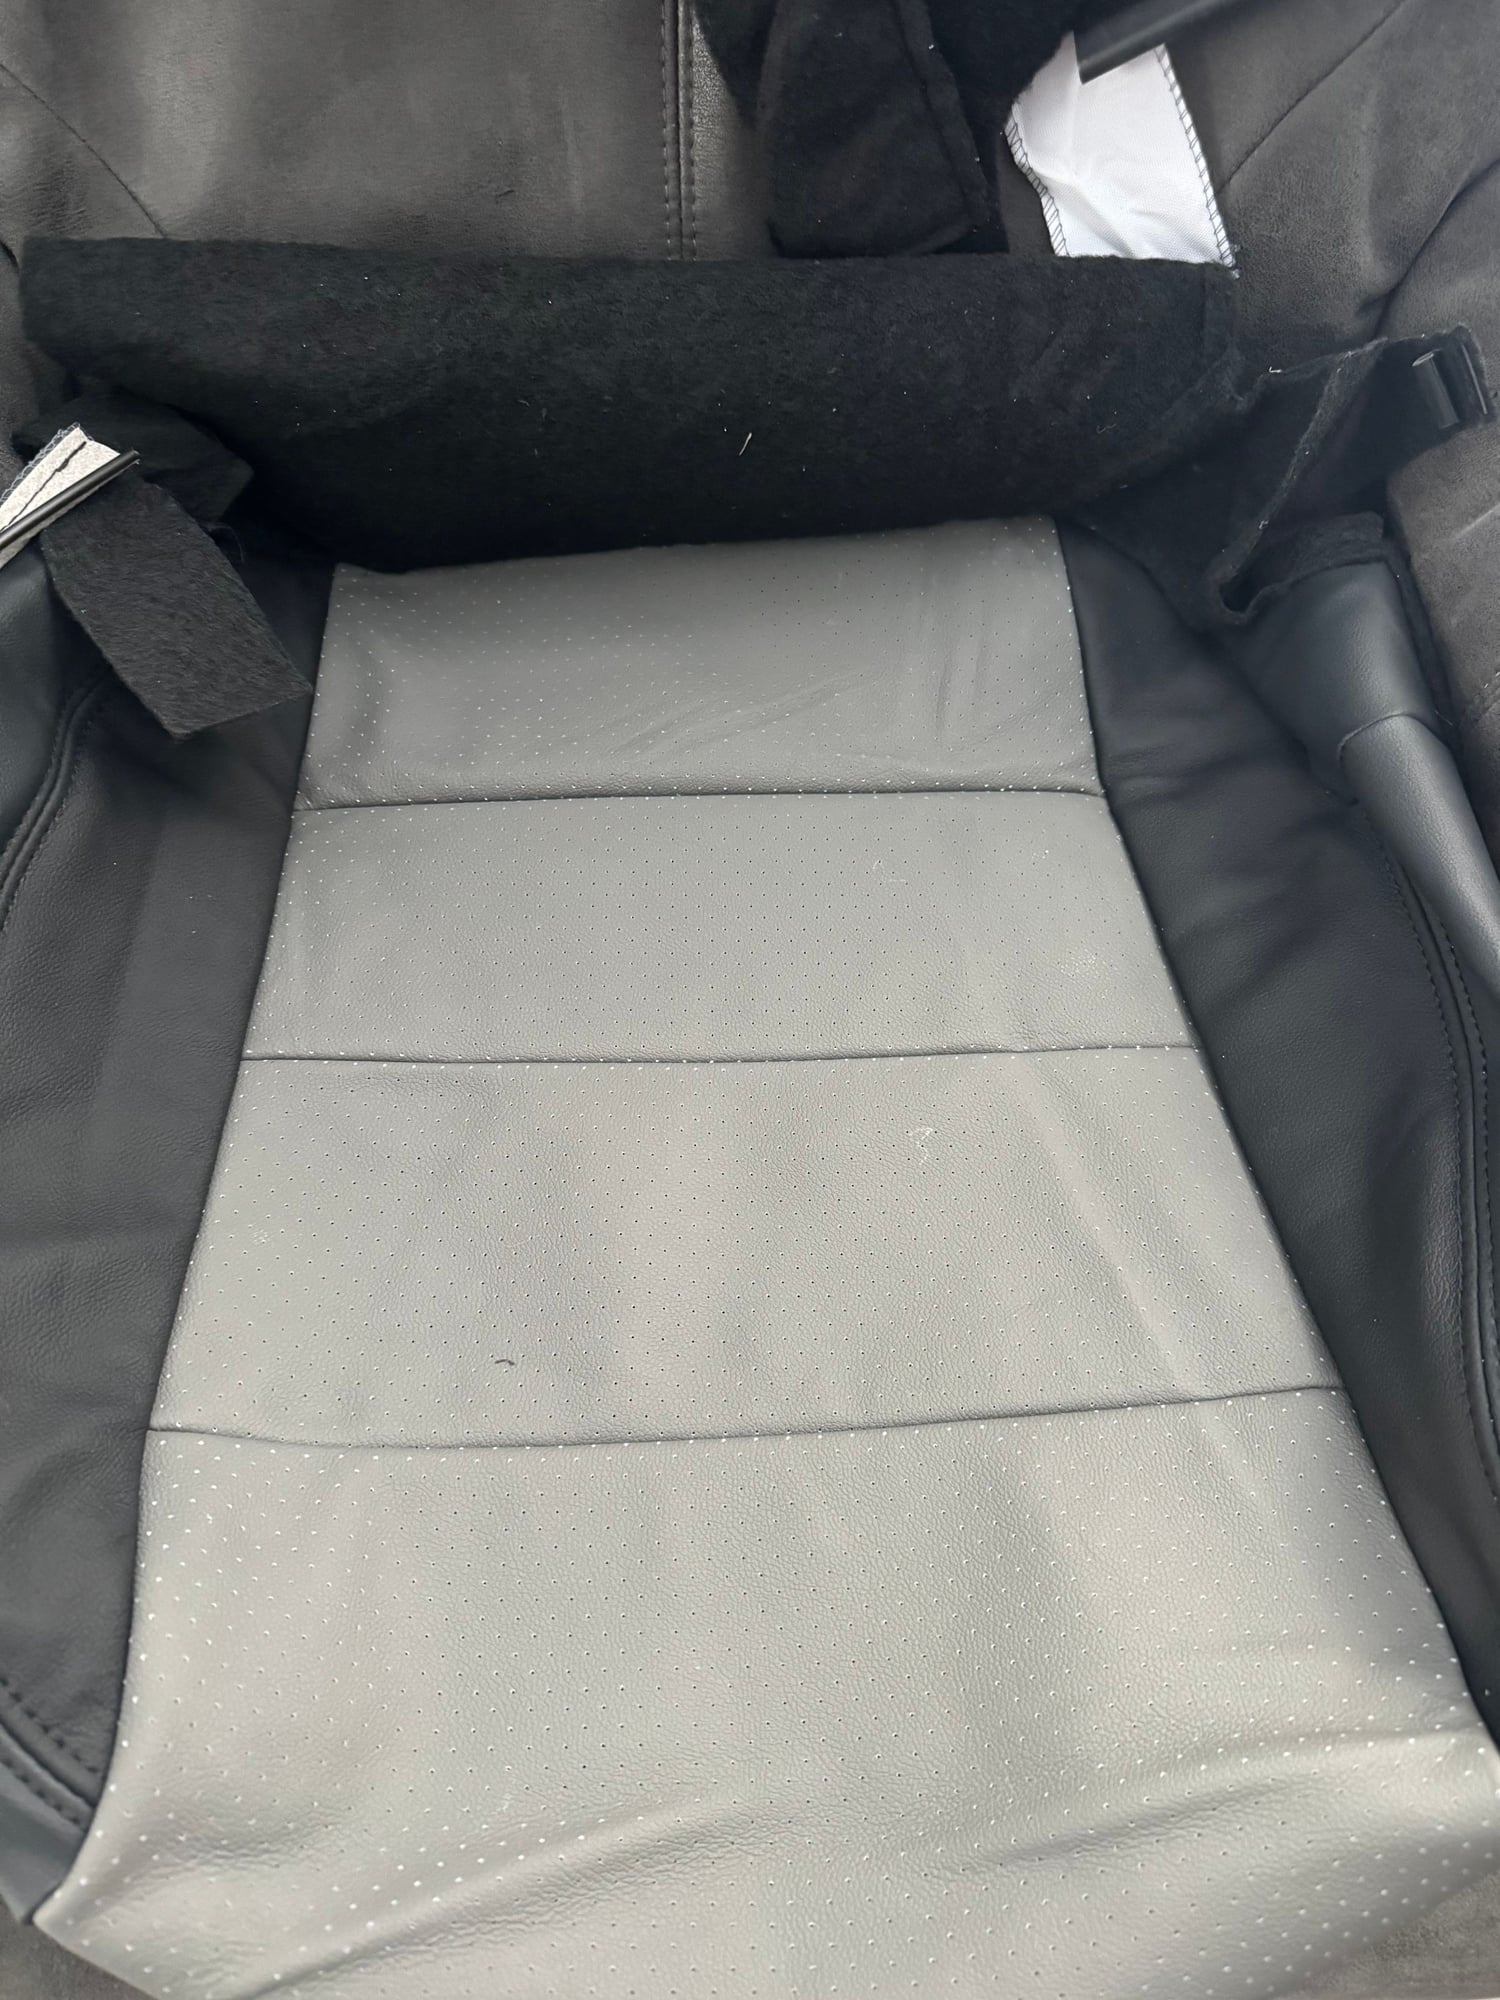 Interior/Upholstery - FS: Brand new L Seat covers for type S - New - All Years  All Models - Smyrna, DE 19977, United States